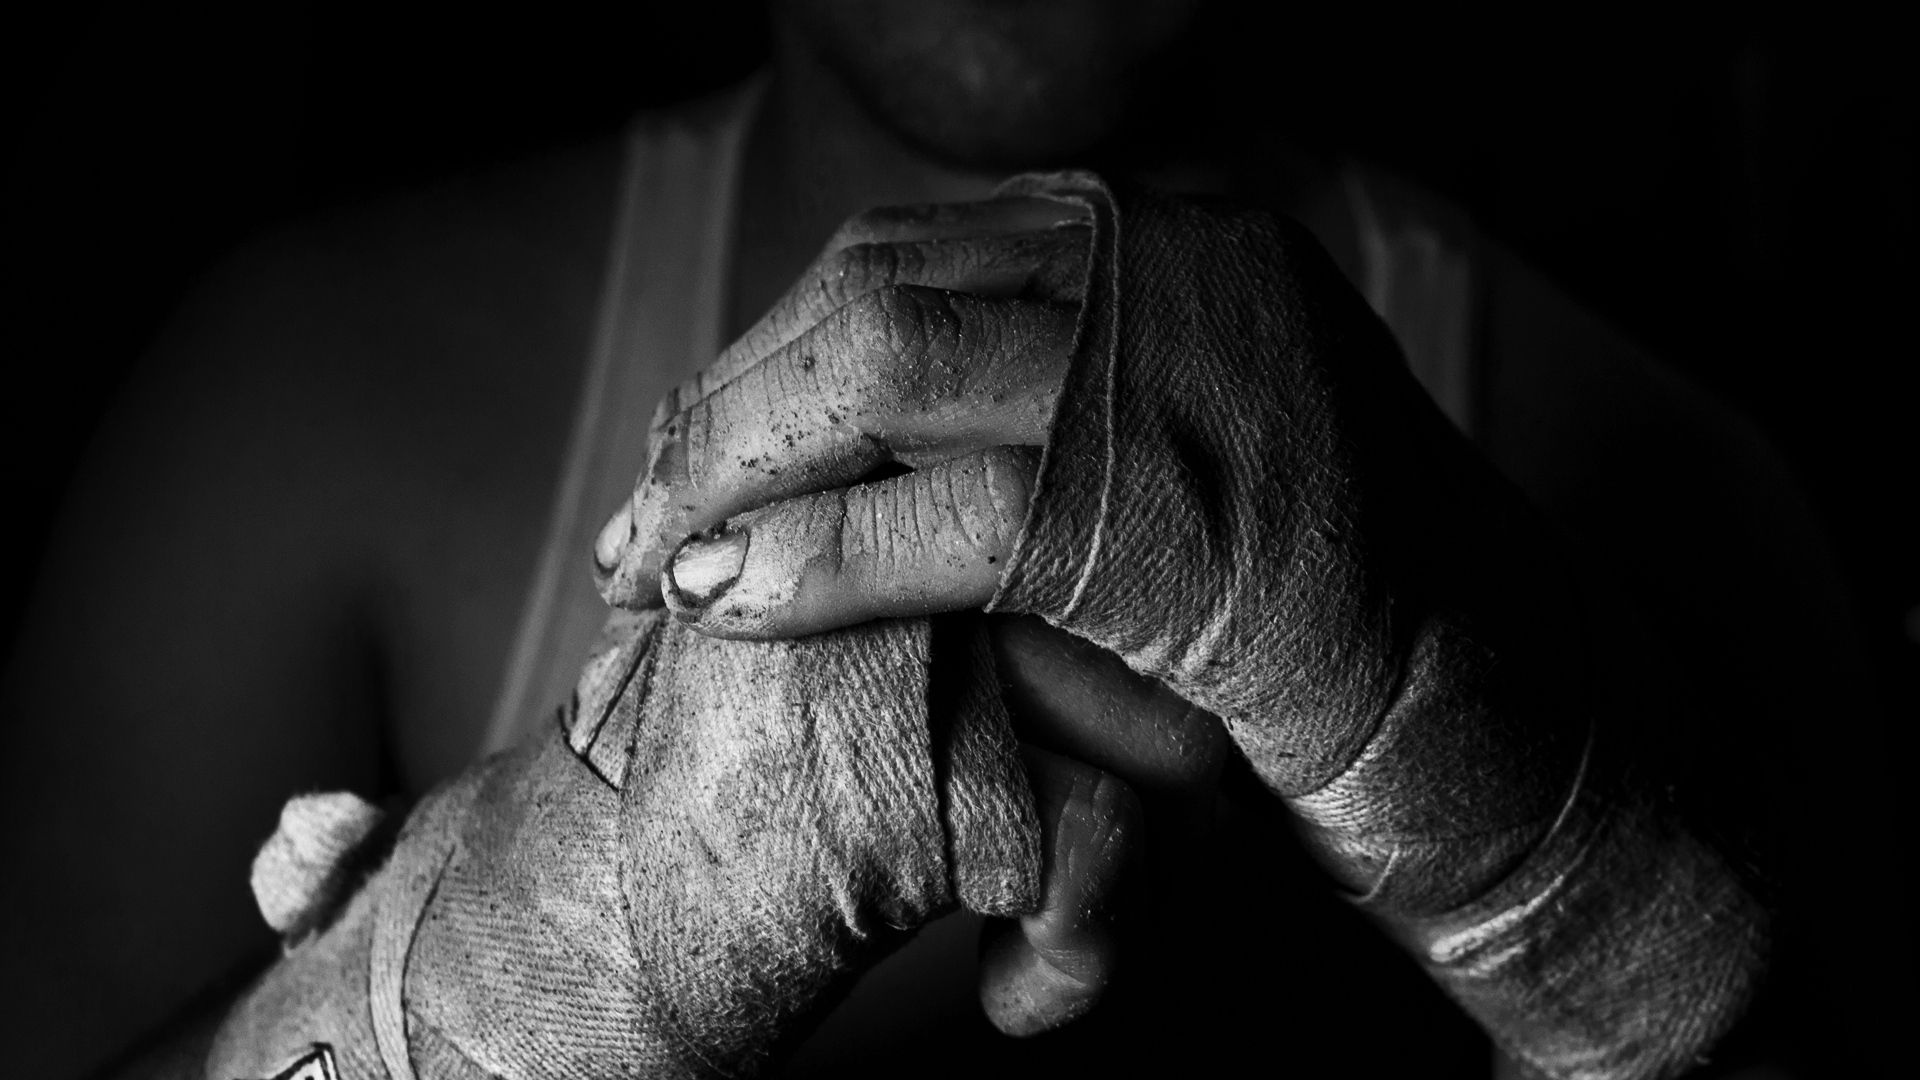 chb, sports, hands, bw, fighter, bandages cellphone